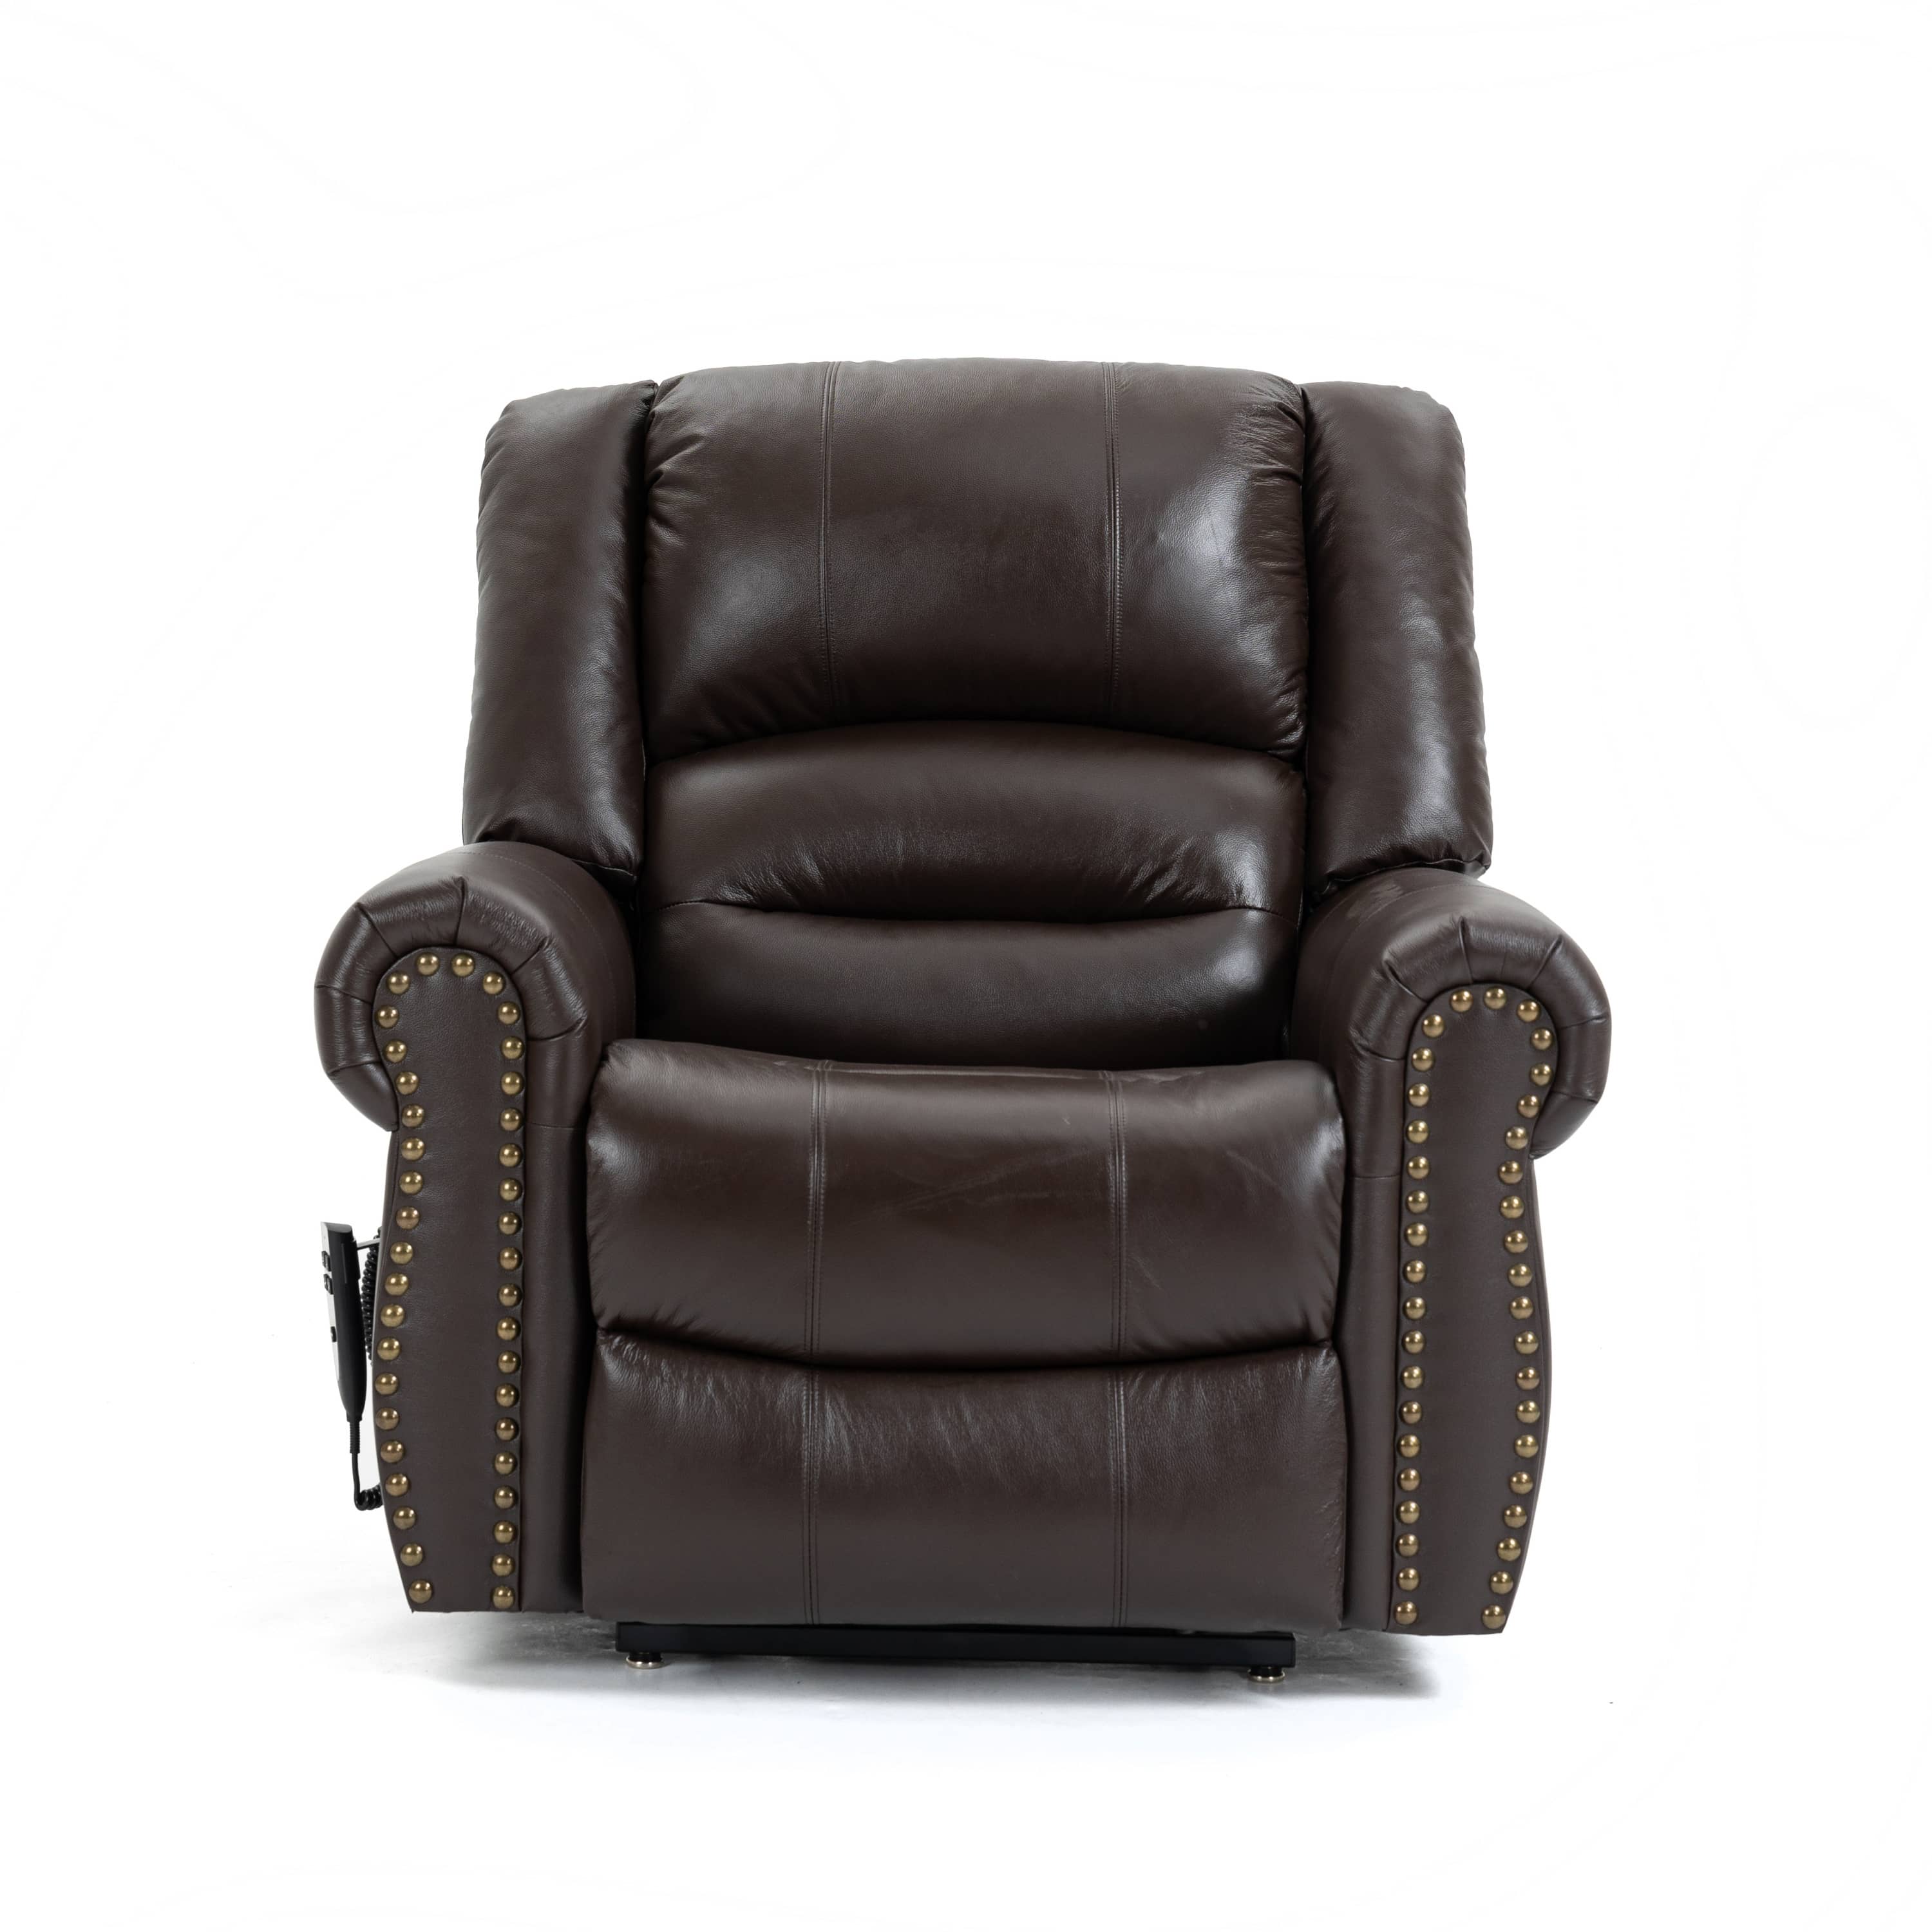 Genuine Leather Power Lift Recliner, seated front view